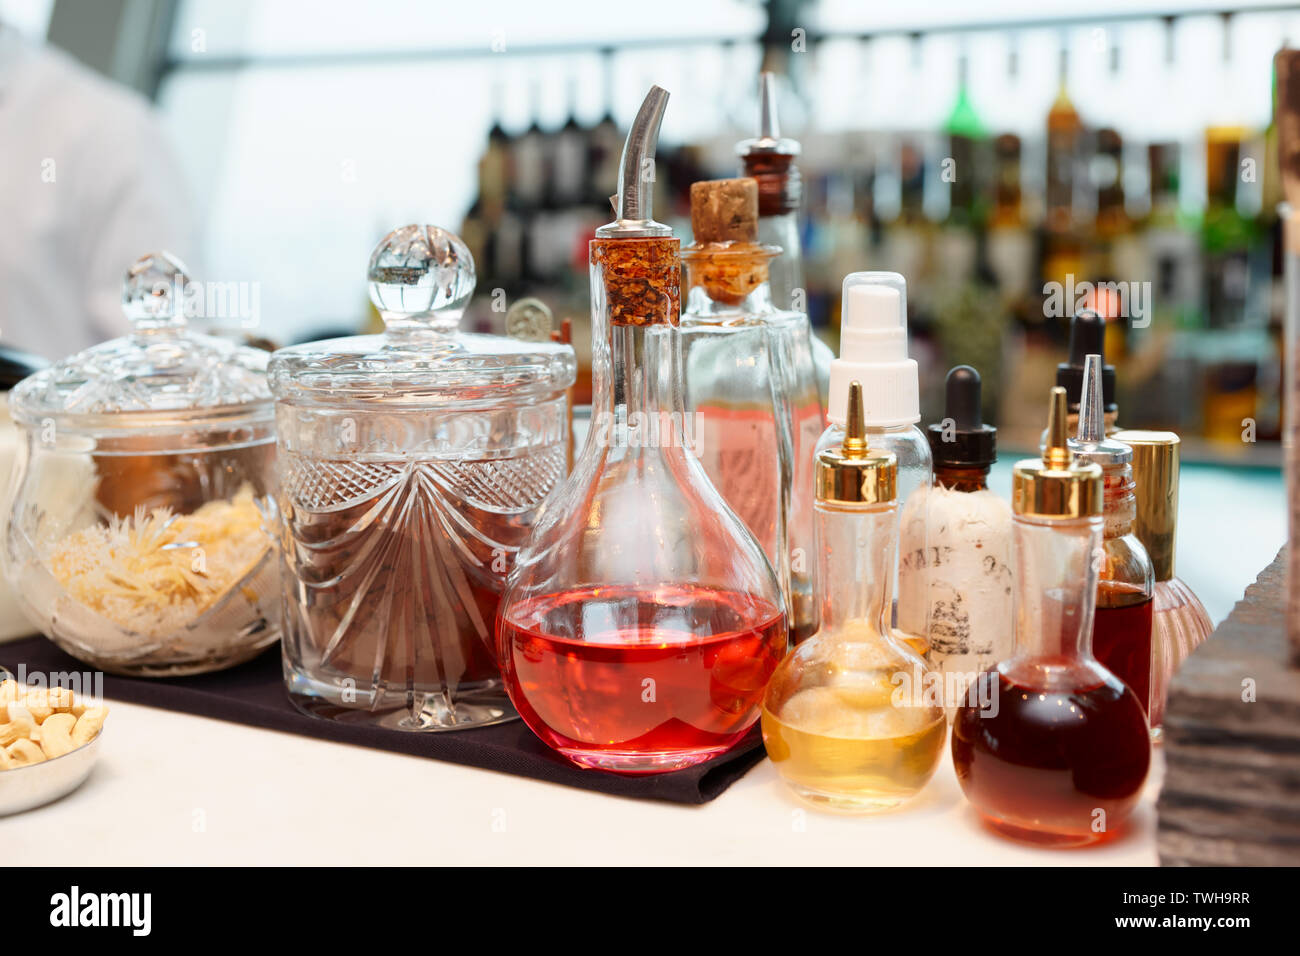 Bitters, spices and infusions on bar counter Stock Photo